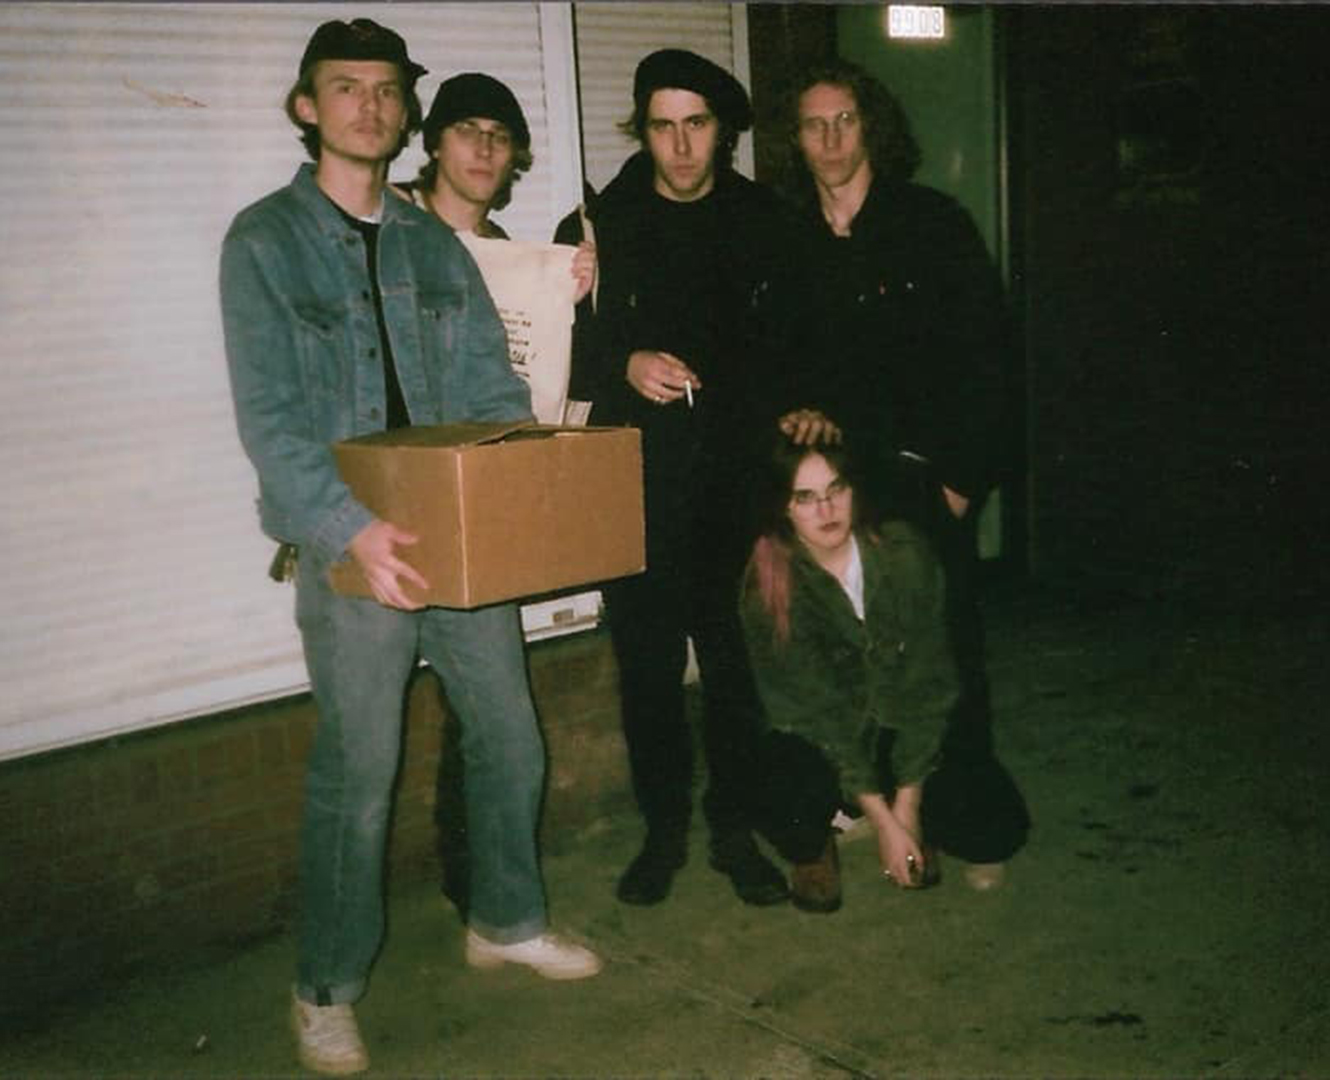 five bandmates pose at night in front of garage holding boxes